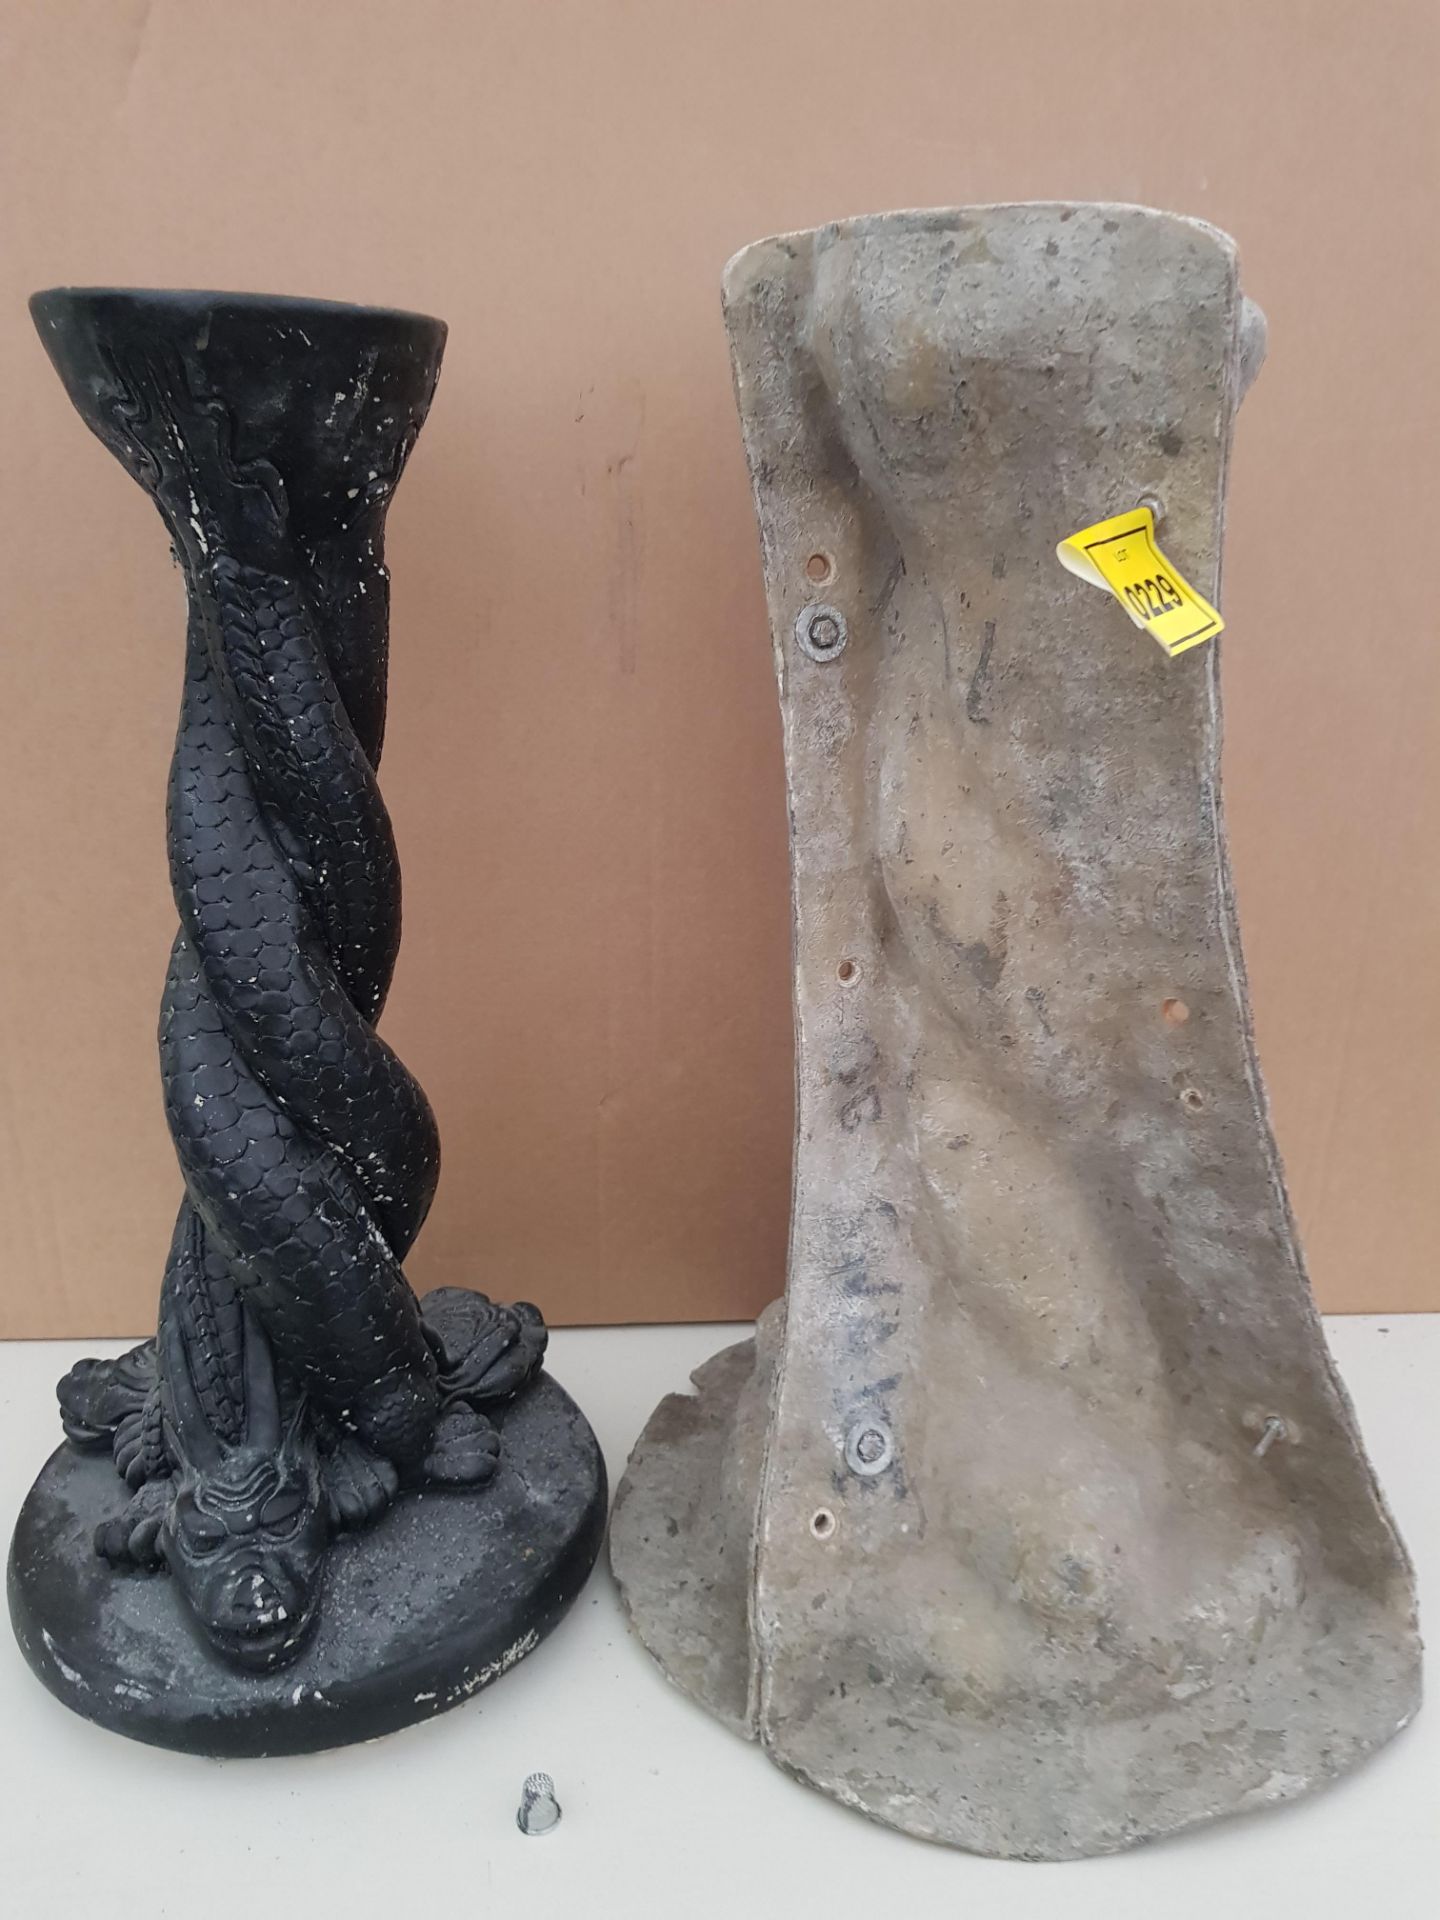 60CM SNAKE POST/PILLAR MASTER CAST WITH LATEX SLIP & FIBRE GLASS MOULD (FOR CASTING PRODUCT TO